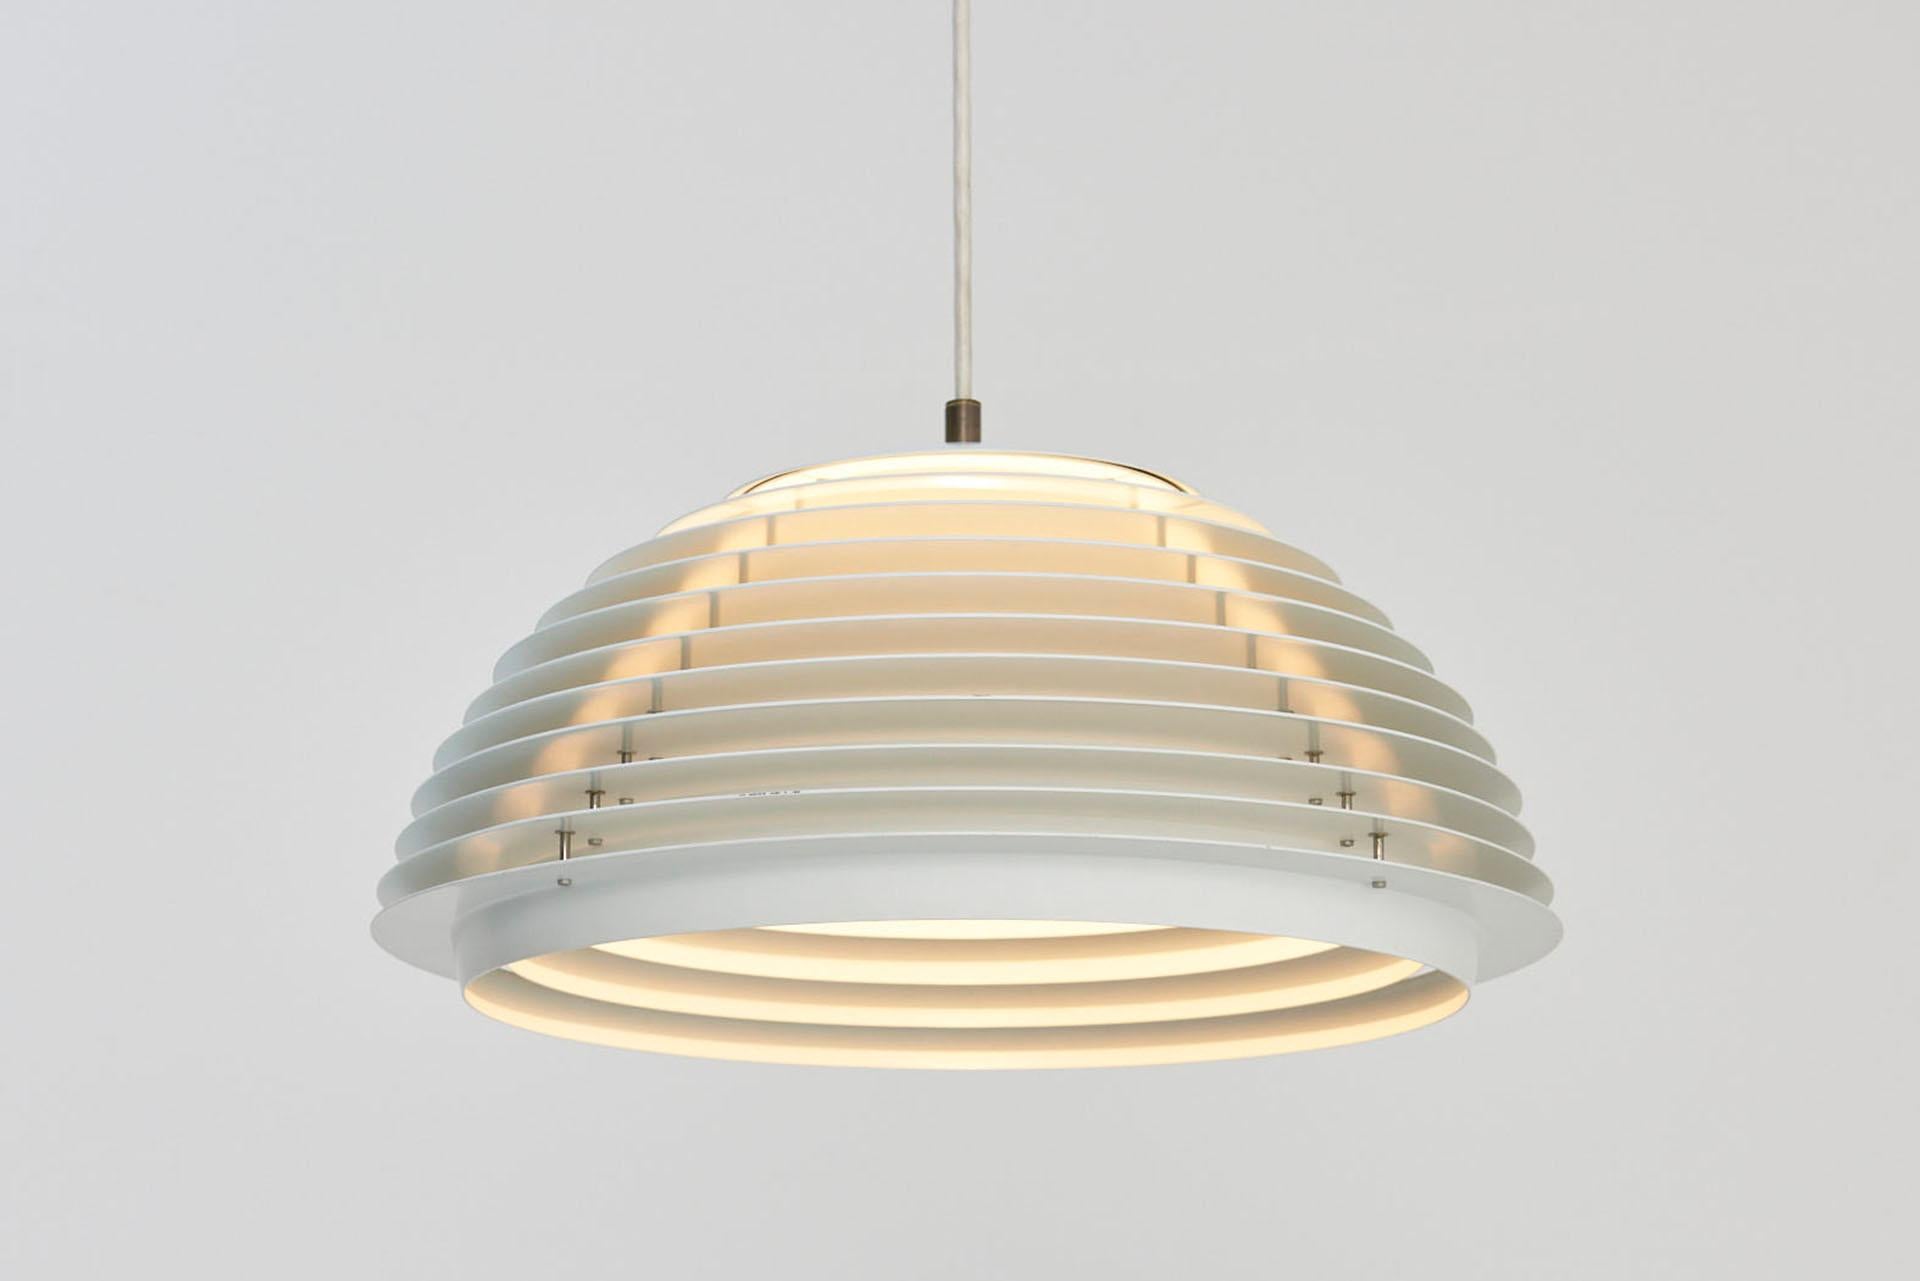 This Hekla pendant light was designed by Jon Olafsson & Pétur B. Luthersson and manufactured by Fog & Mørup in the 1960s. The white-lacquered metal rings are connected by small aluminium tubes and they produce a pyramid-shaped light beam. The lamp